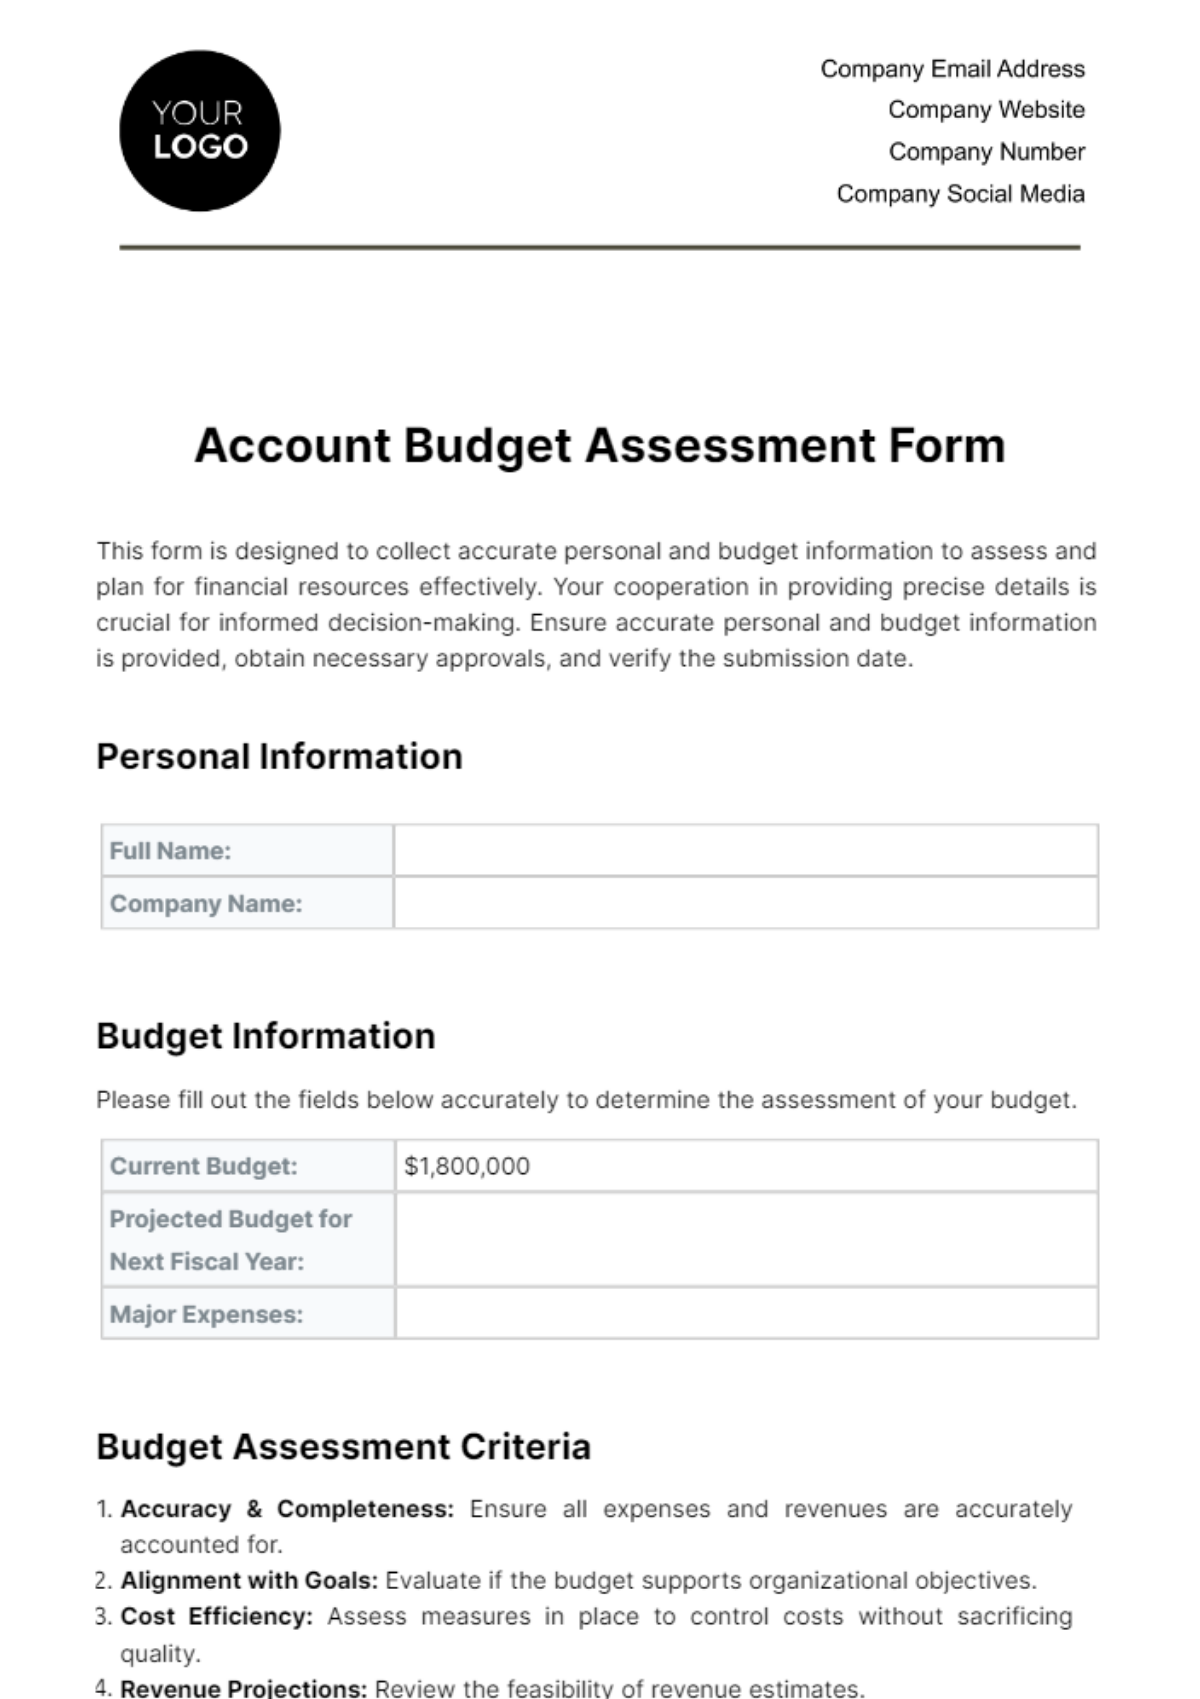 Account Budget Assessment Form Template